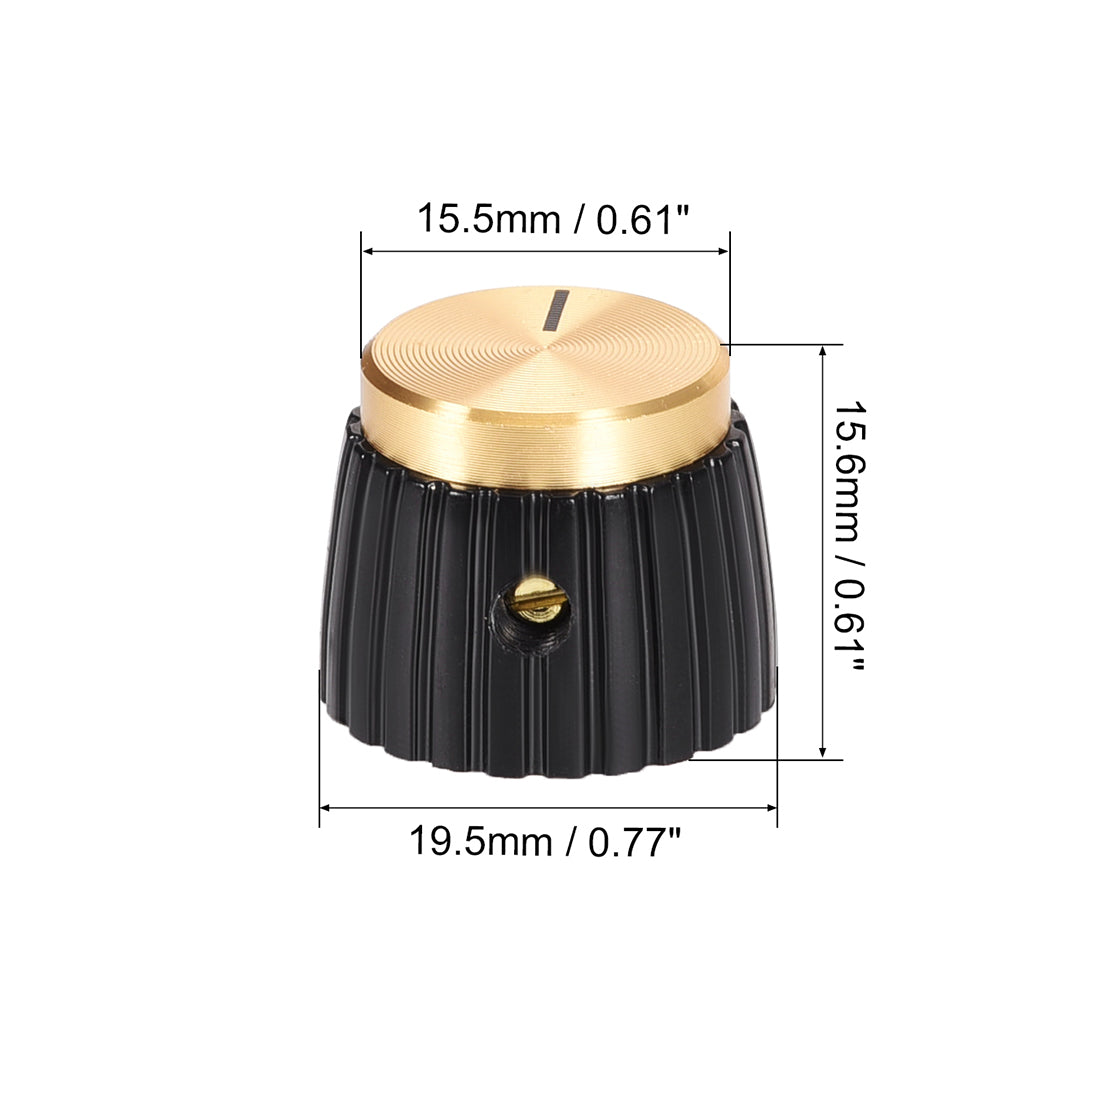 uxcell Uxcell 2pcs Potentiometer Knob  Style Amplifier Replacement Knob Black with Gold Cap Volume Control Knob